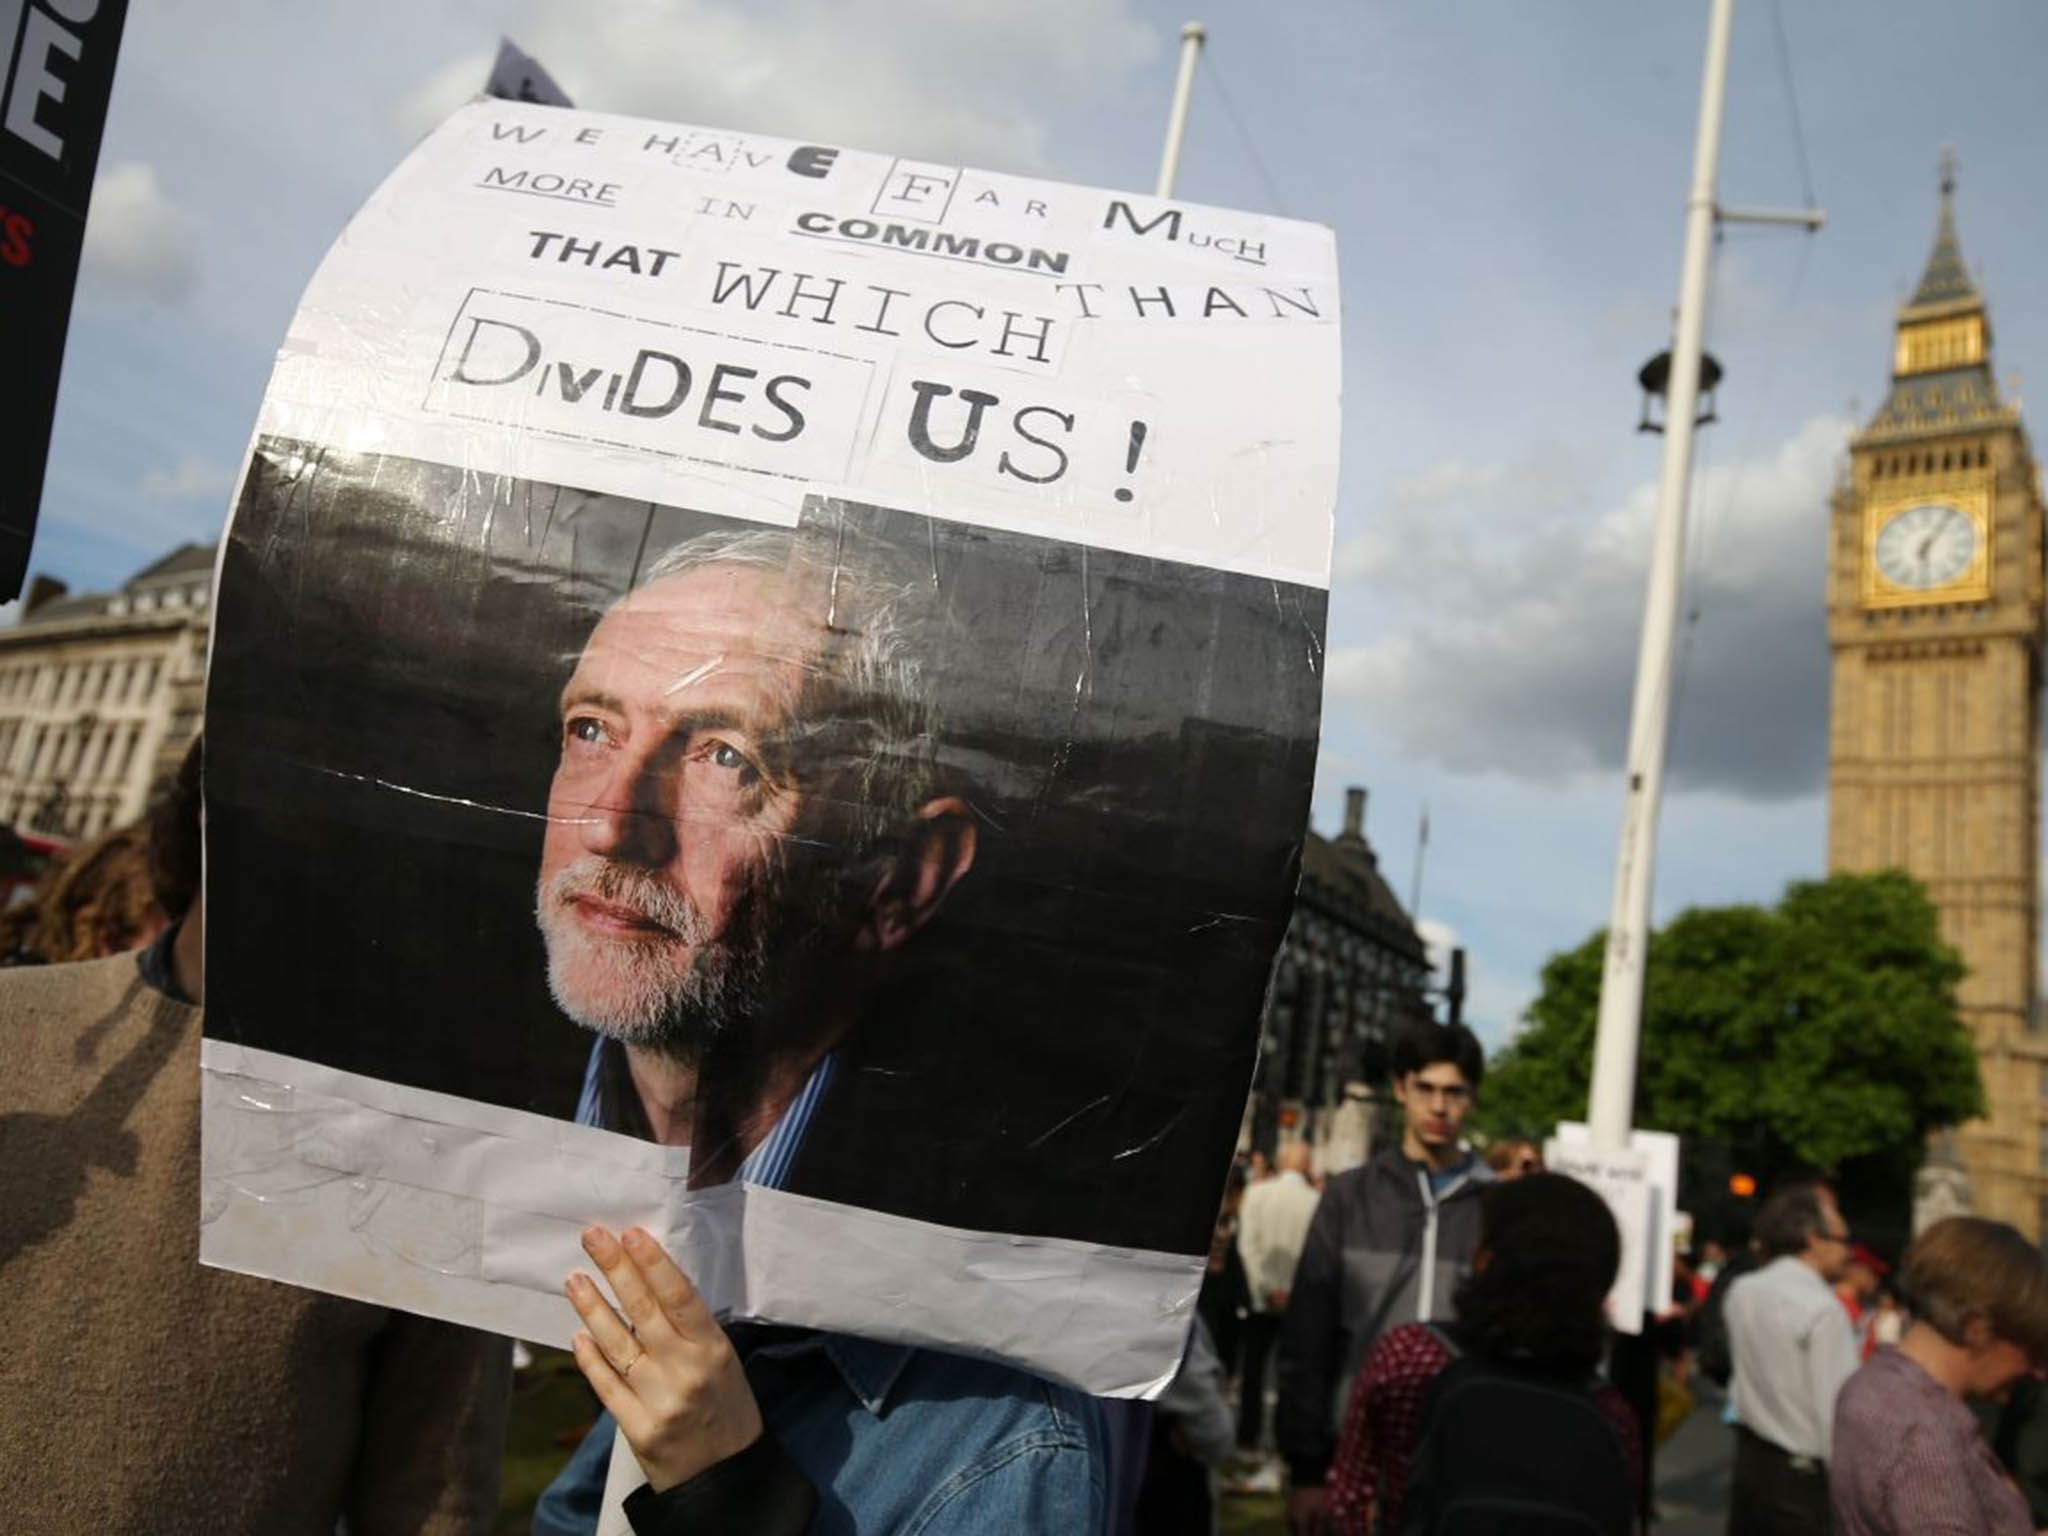 Jeremy Corbyn, now Labour leader, was among the then backbenchers who opposed the invasion of Iraq